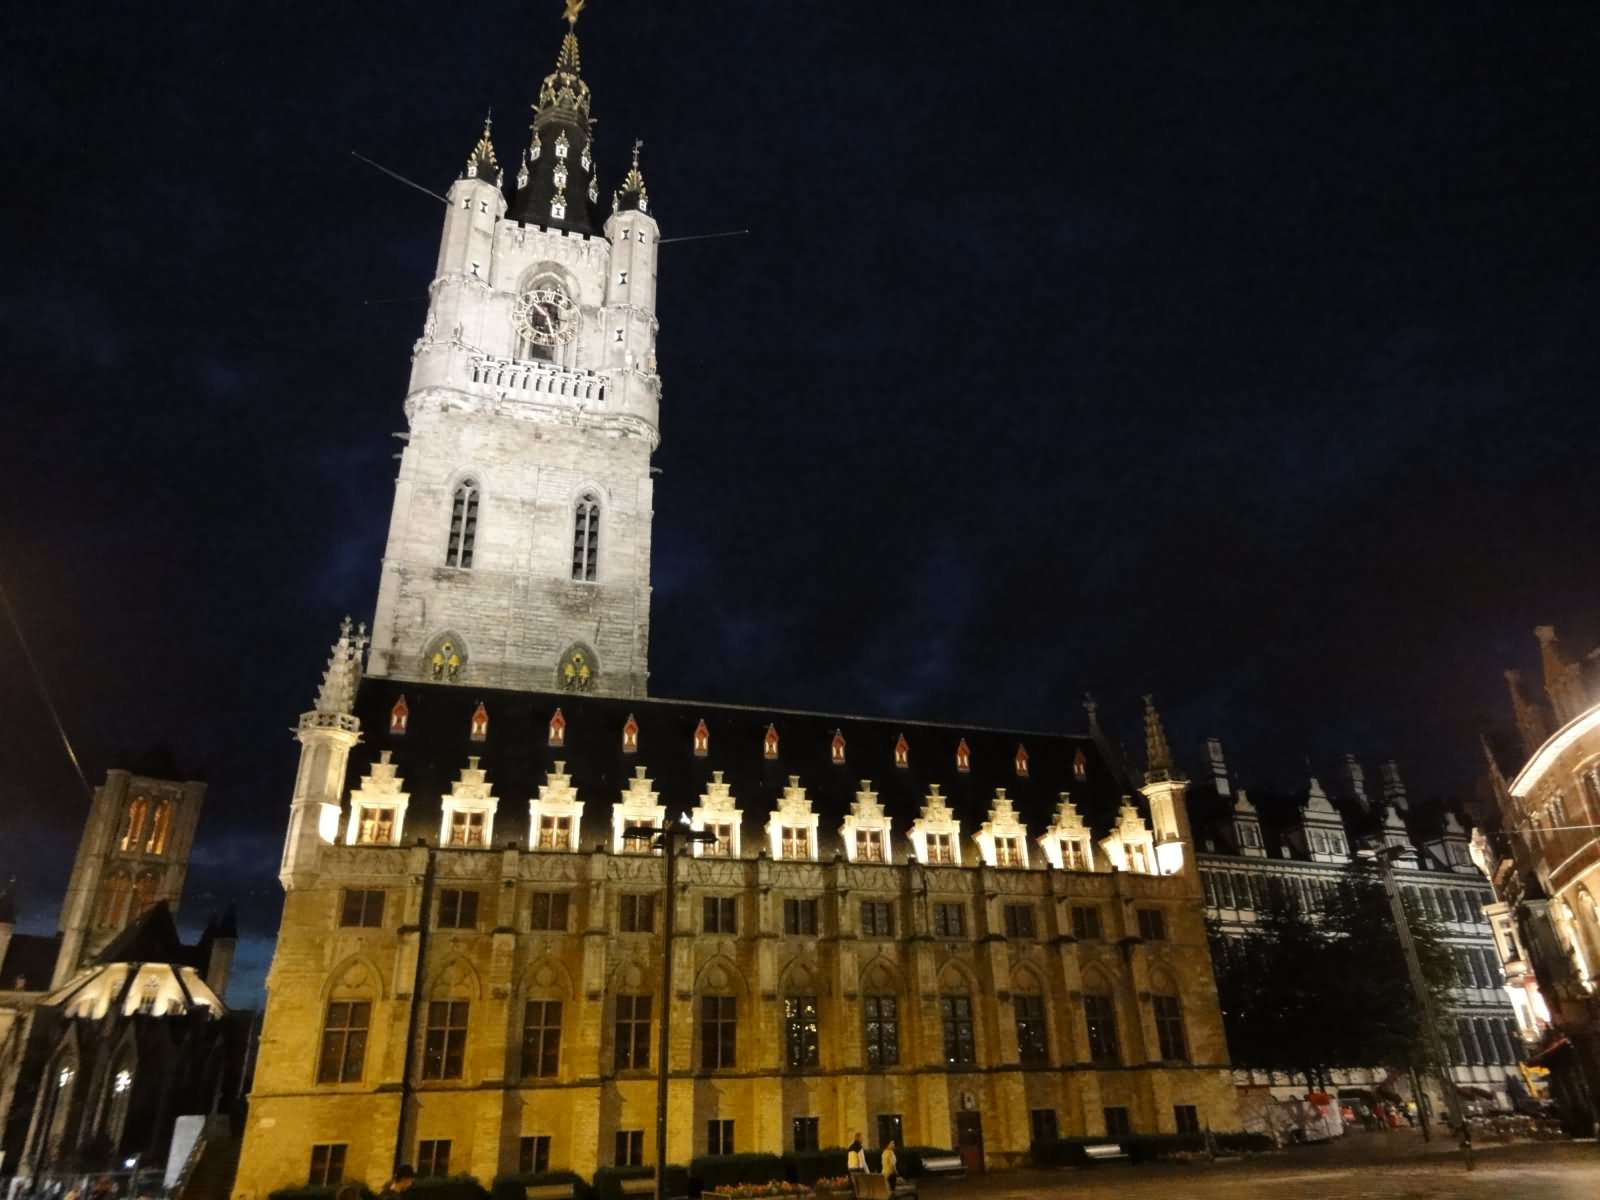 The Belfry In Ghent, Belgium Lit Up At Night